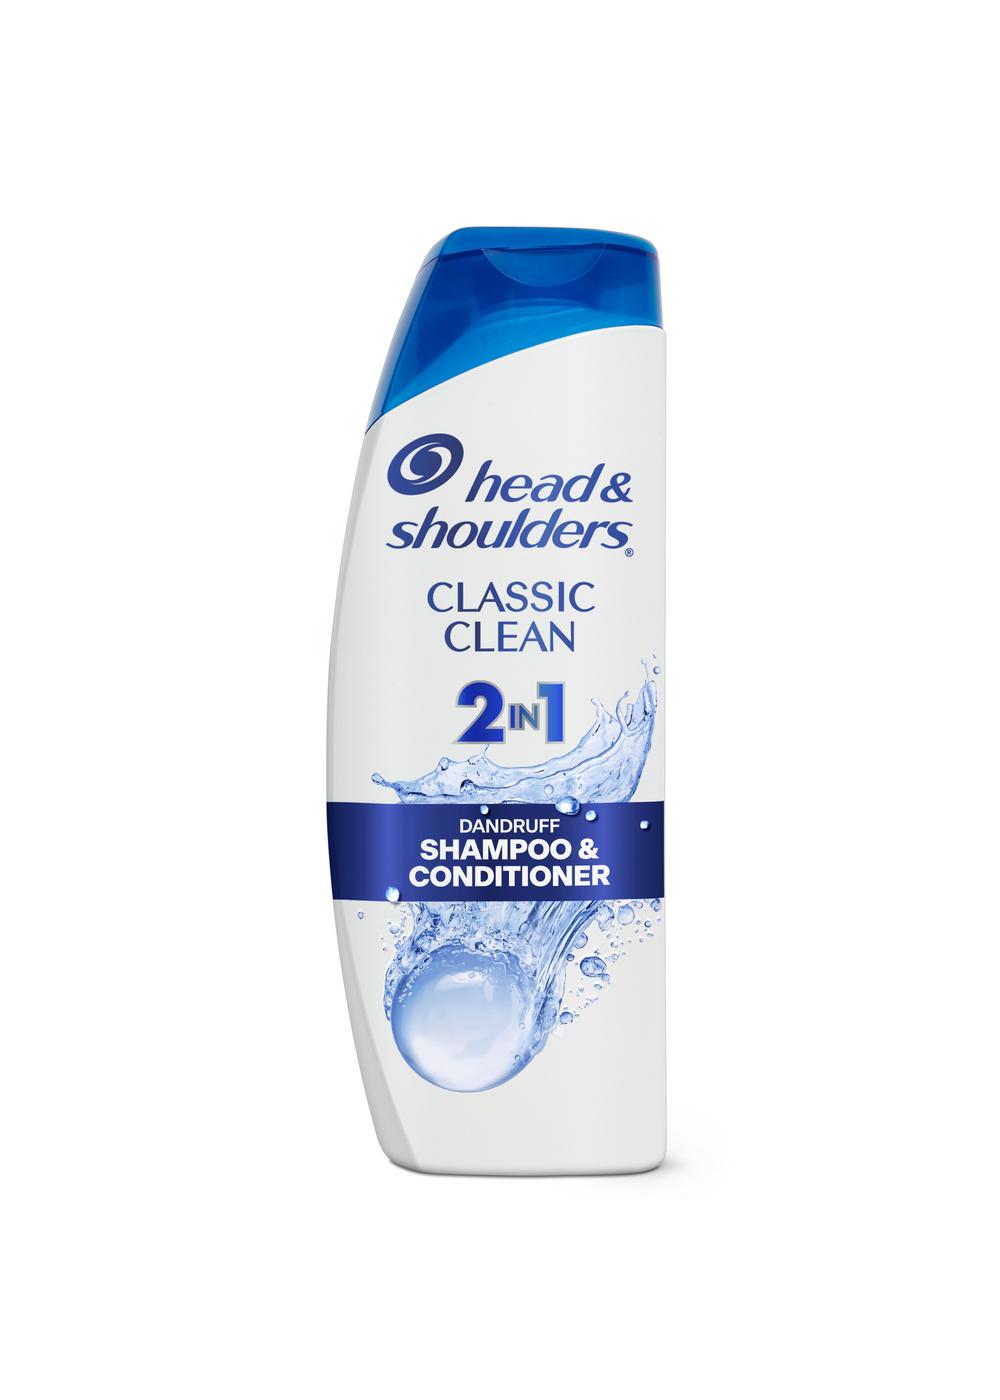 Head & Shoulders 2 in 1 Dandruff Shampoo + Conditioner - Classic Clean; image 3 of 11